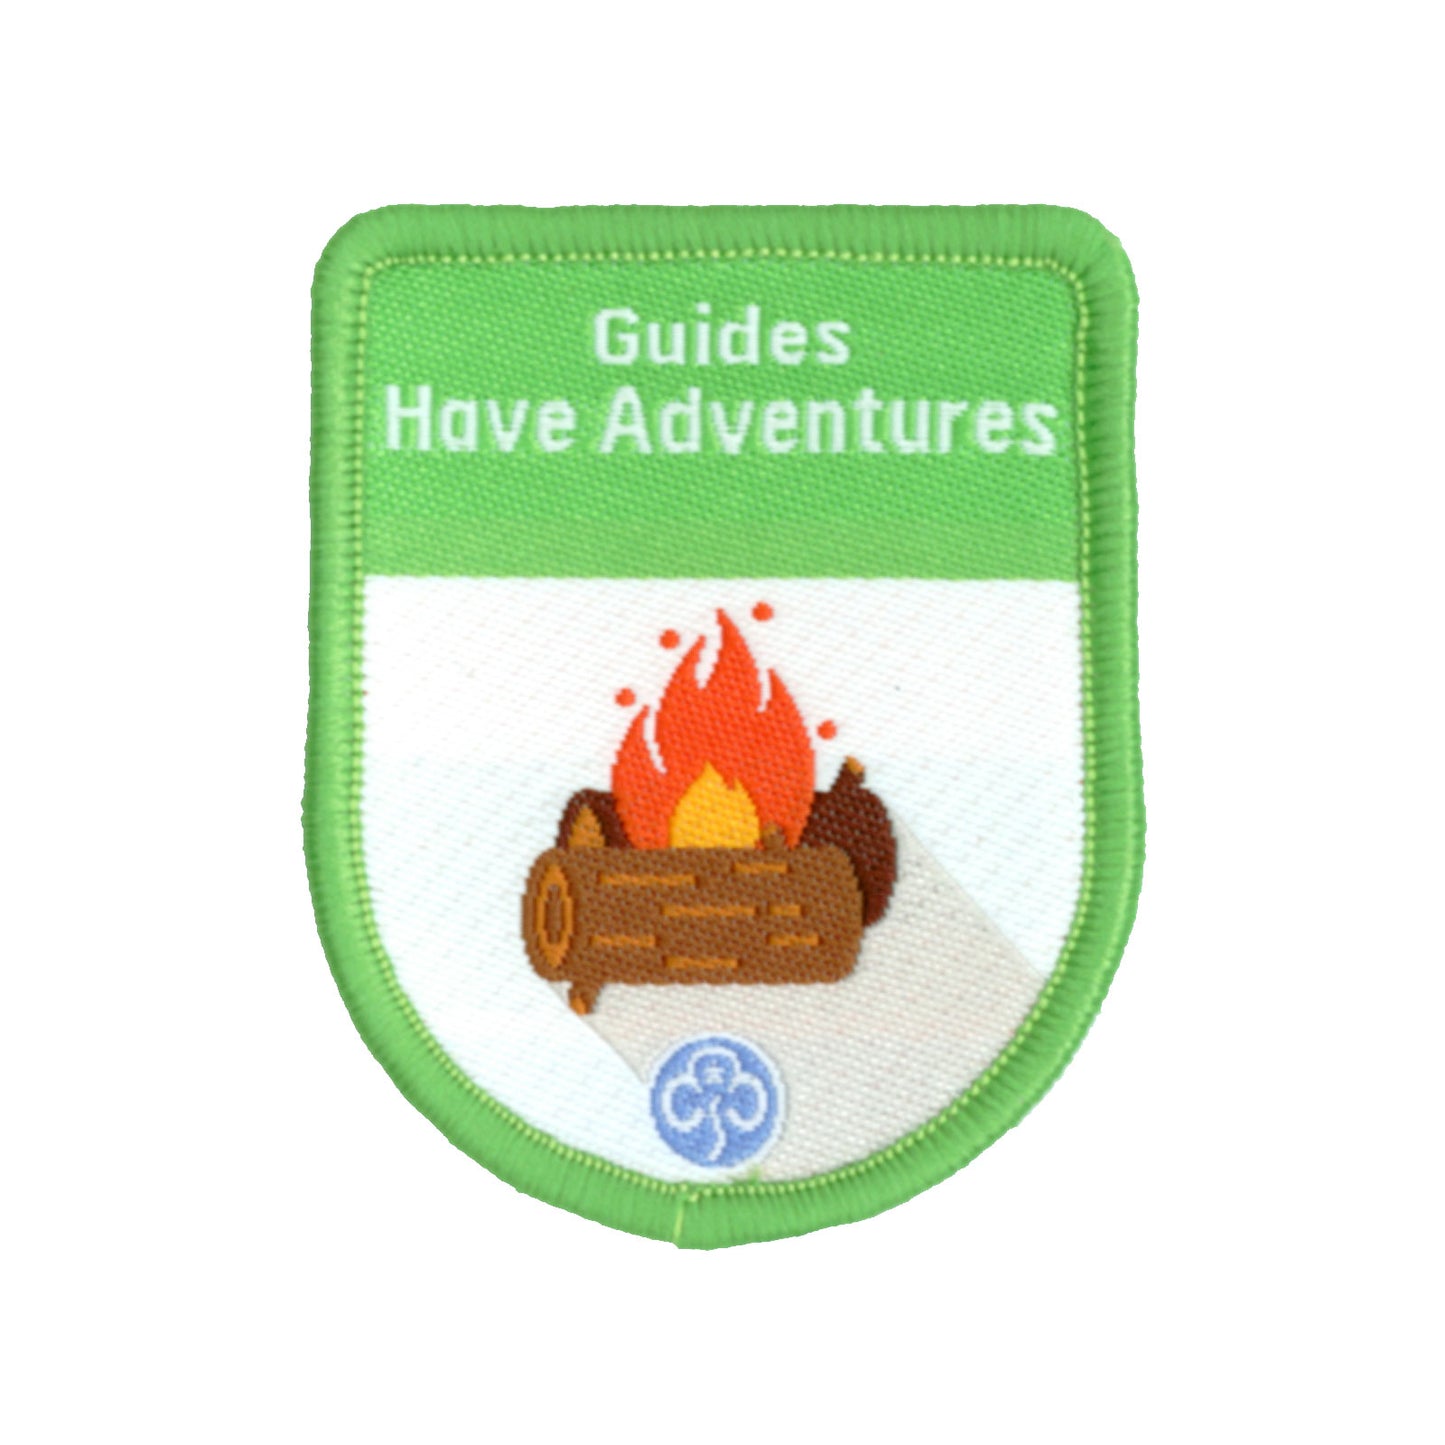 Guides Have Adventures Theme Award Woven Badge